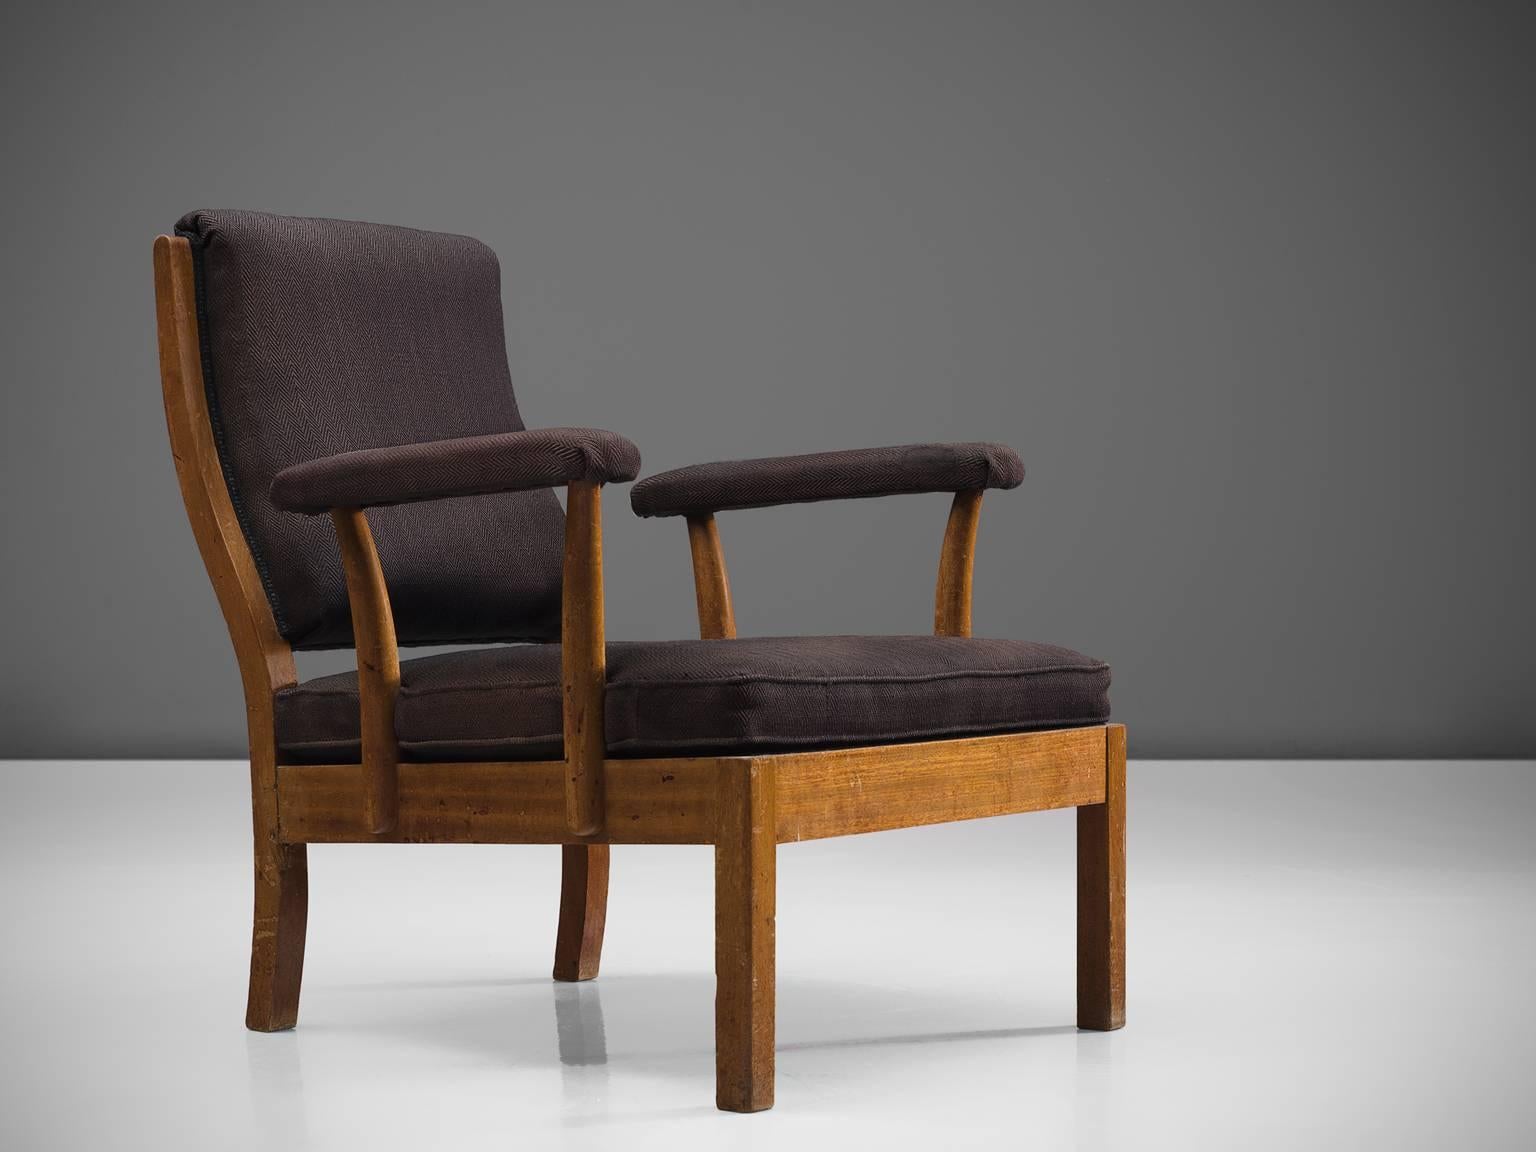 Josef Frank for Svenskt Tenn, armchair 352, brown fabric and mahogany, Sweden, design 1933, production 1934. 

This lounge chair by Josef Frank is produced by the firm Svenskt Tenn. The chair features a very deep seat and a relatively short back